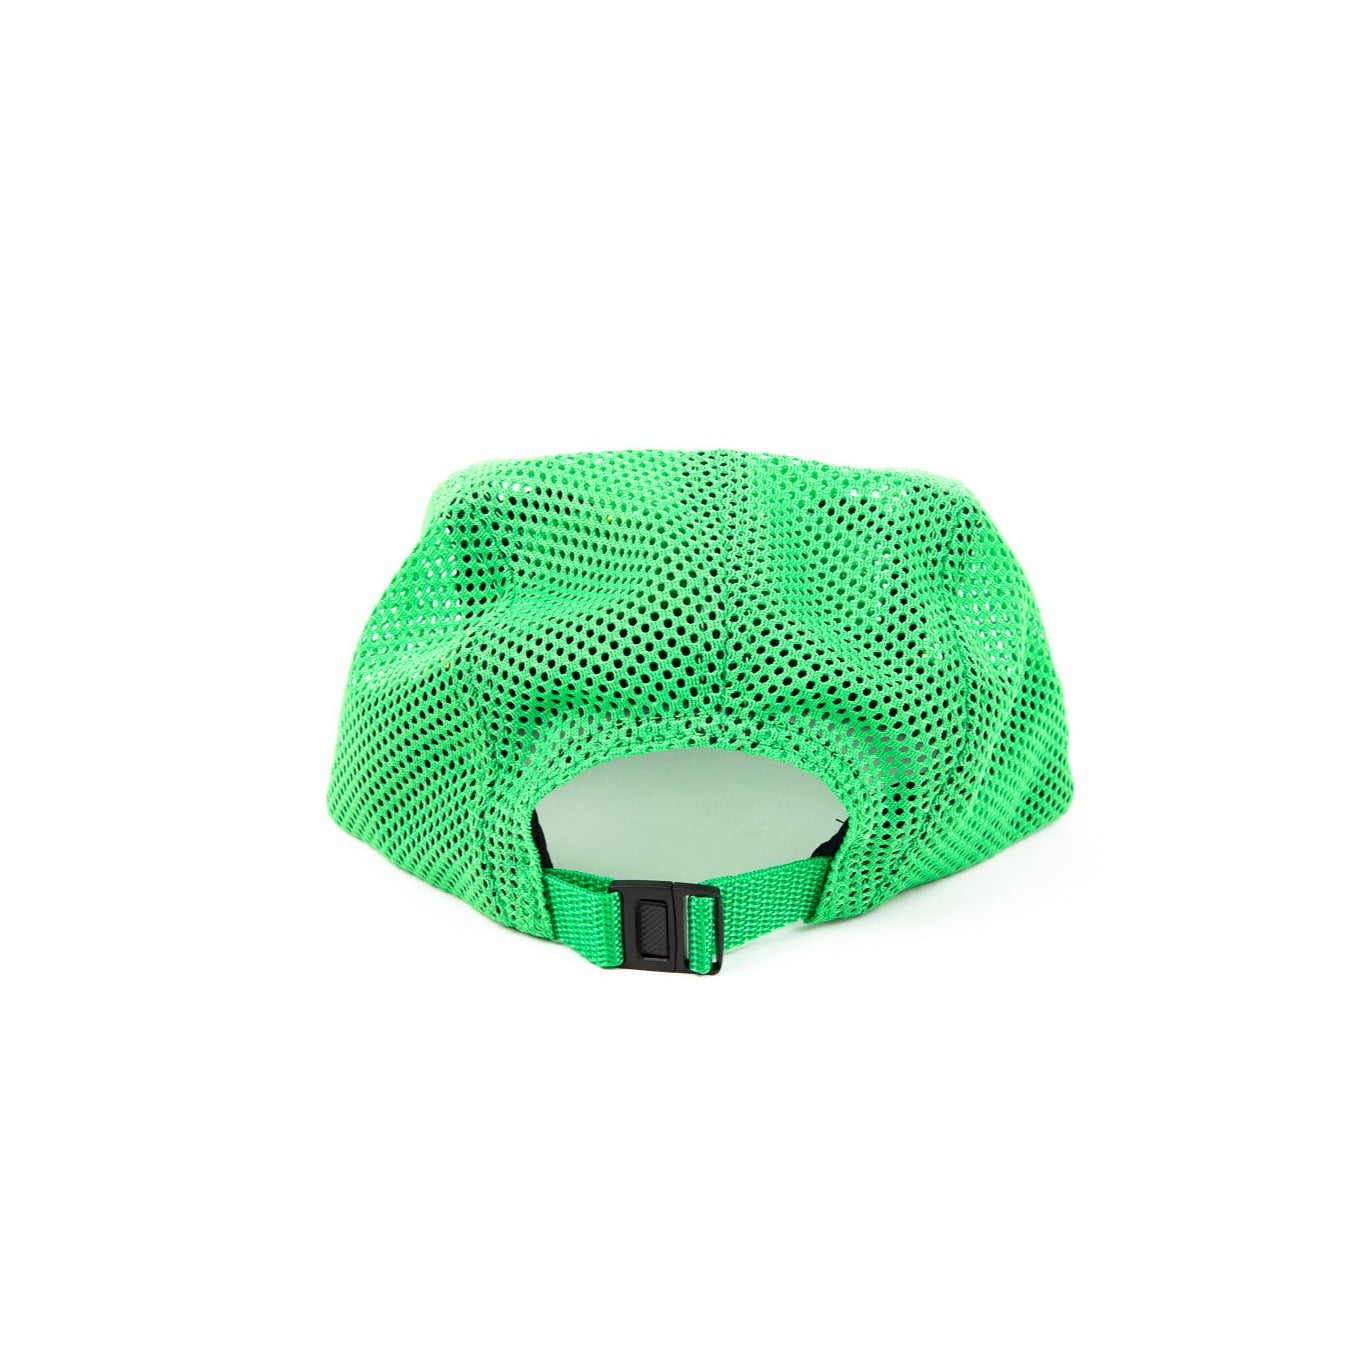 Weed Masters mesh front SPORTS hat